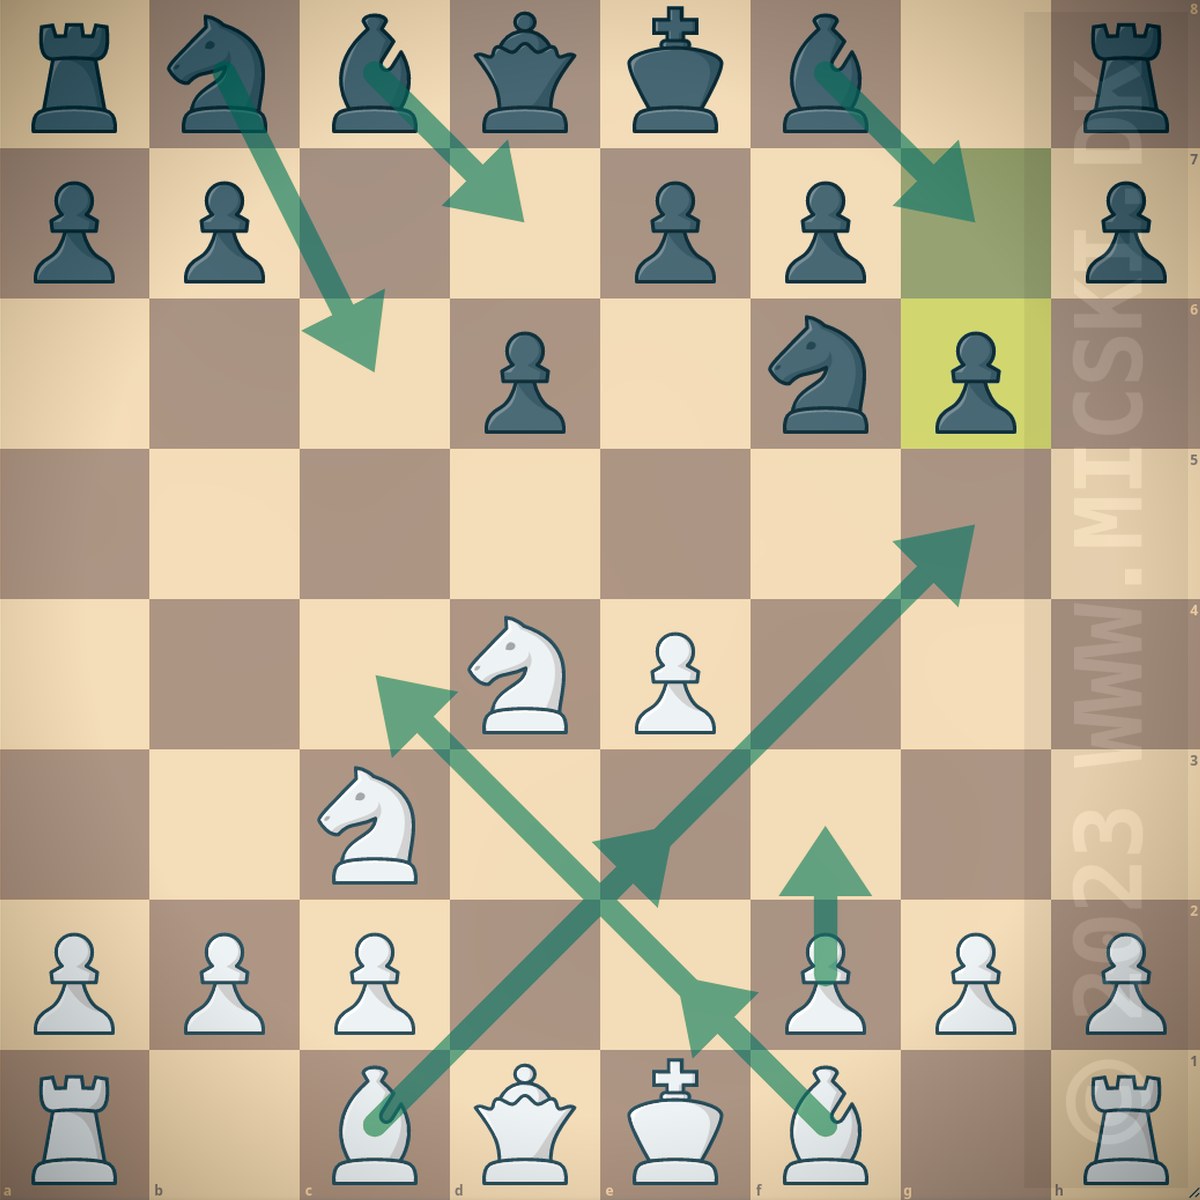 Possible moves from the Dragon variant of the Sicilian chess opening as white.